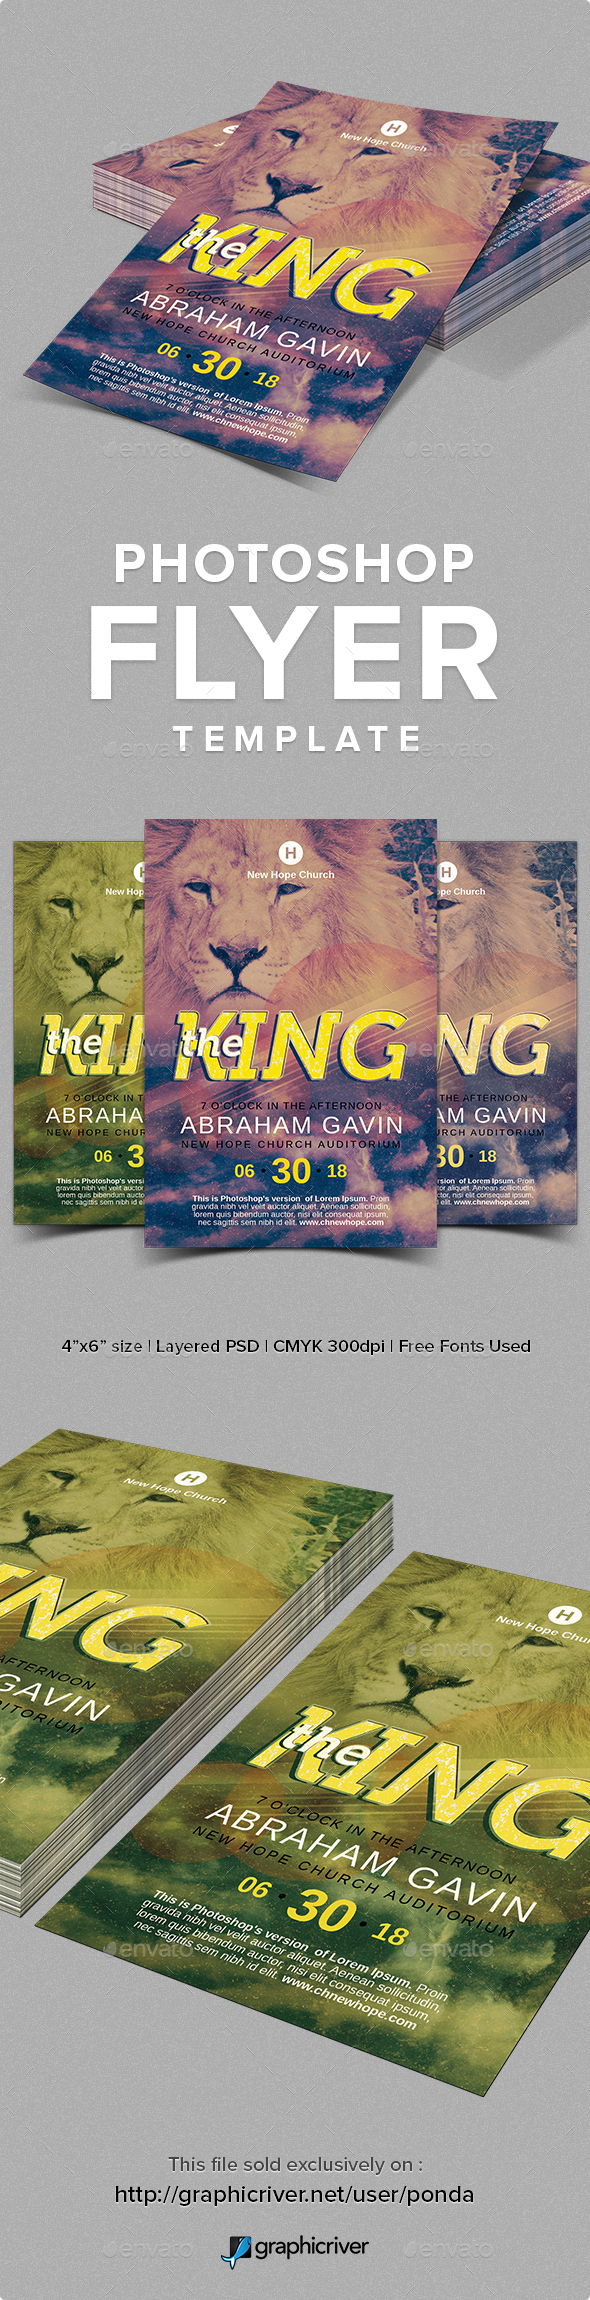 The King Church Flyer Template